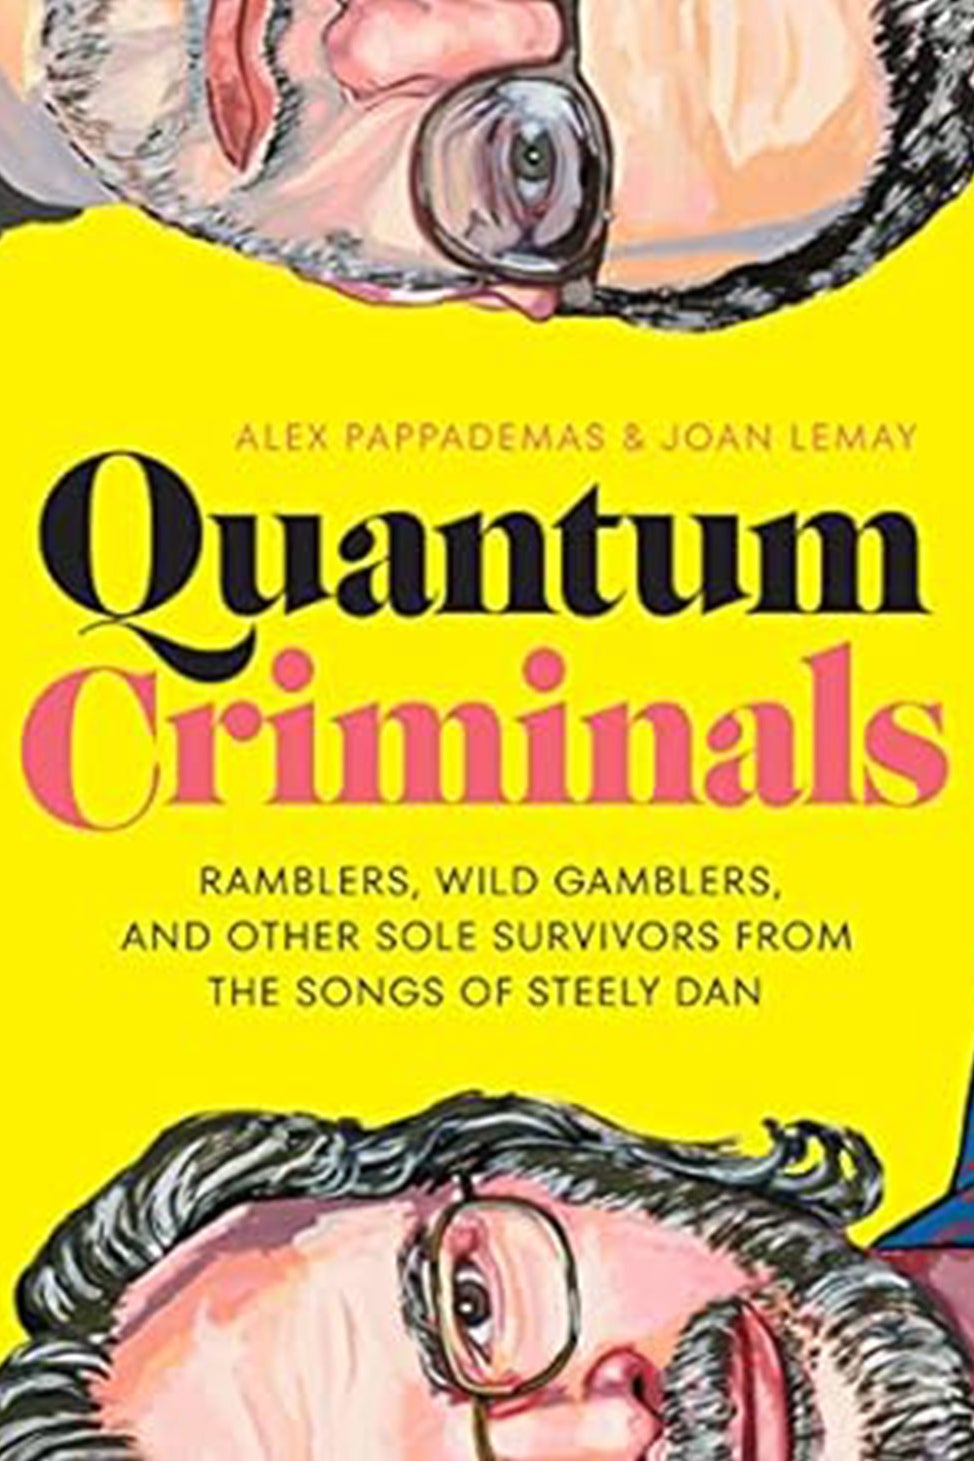 A book jacket features illustrations of some members of Steely Dan.